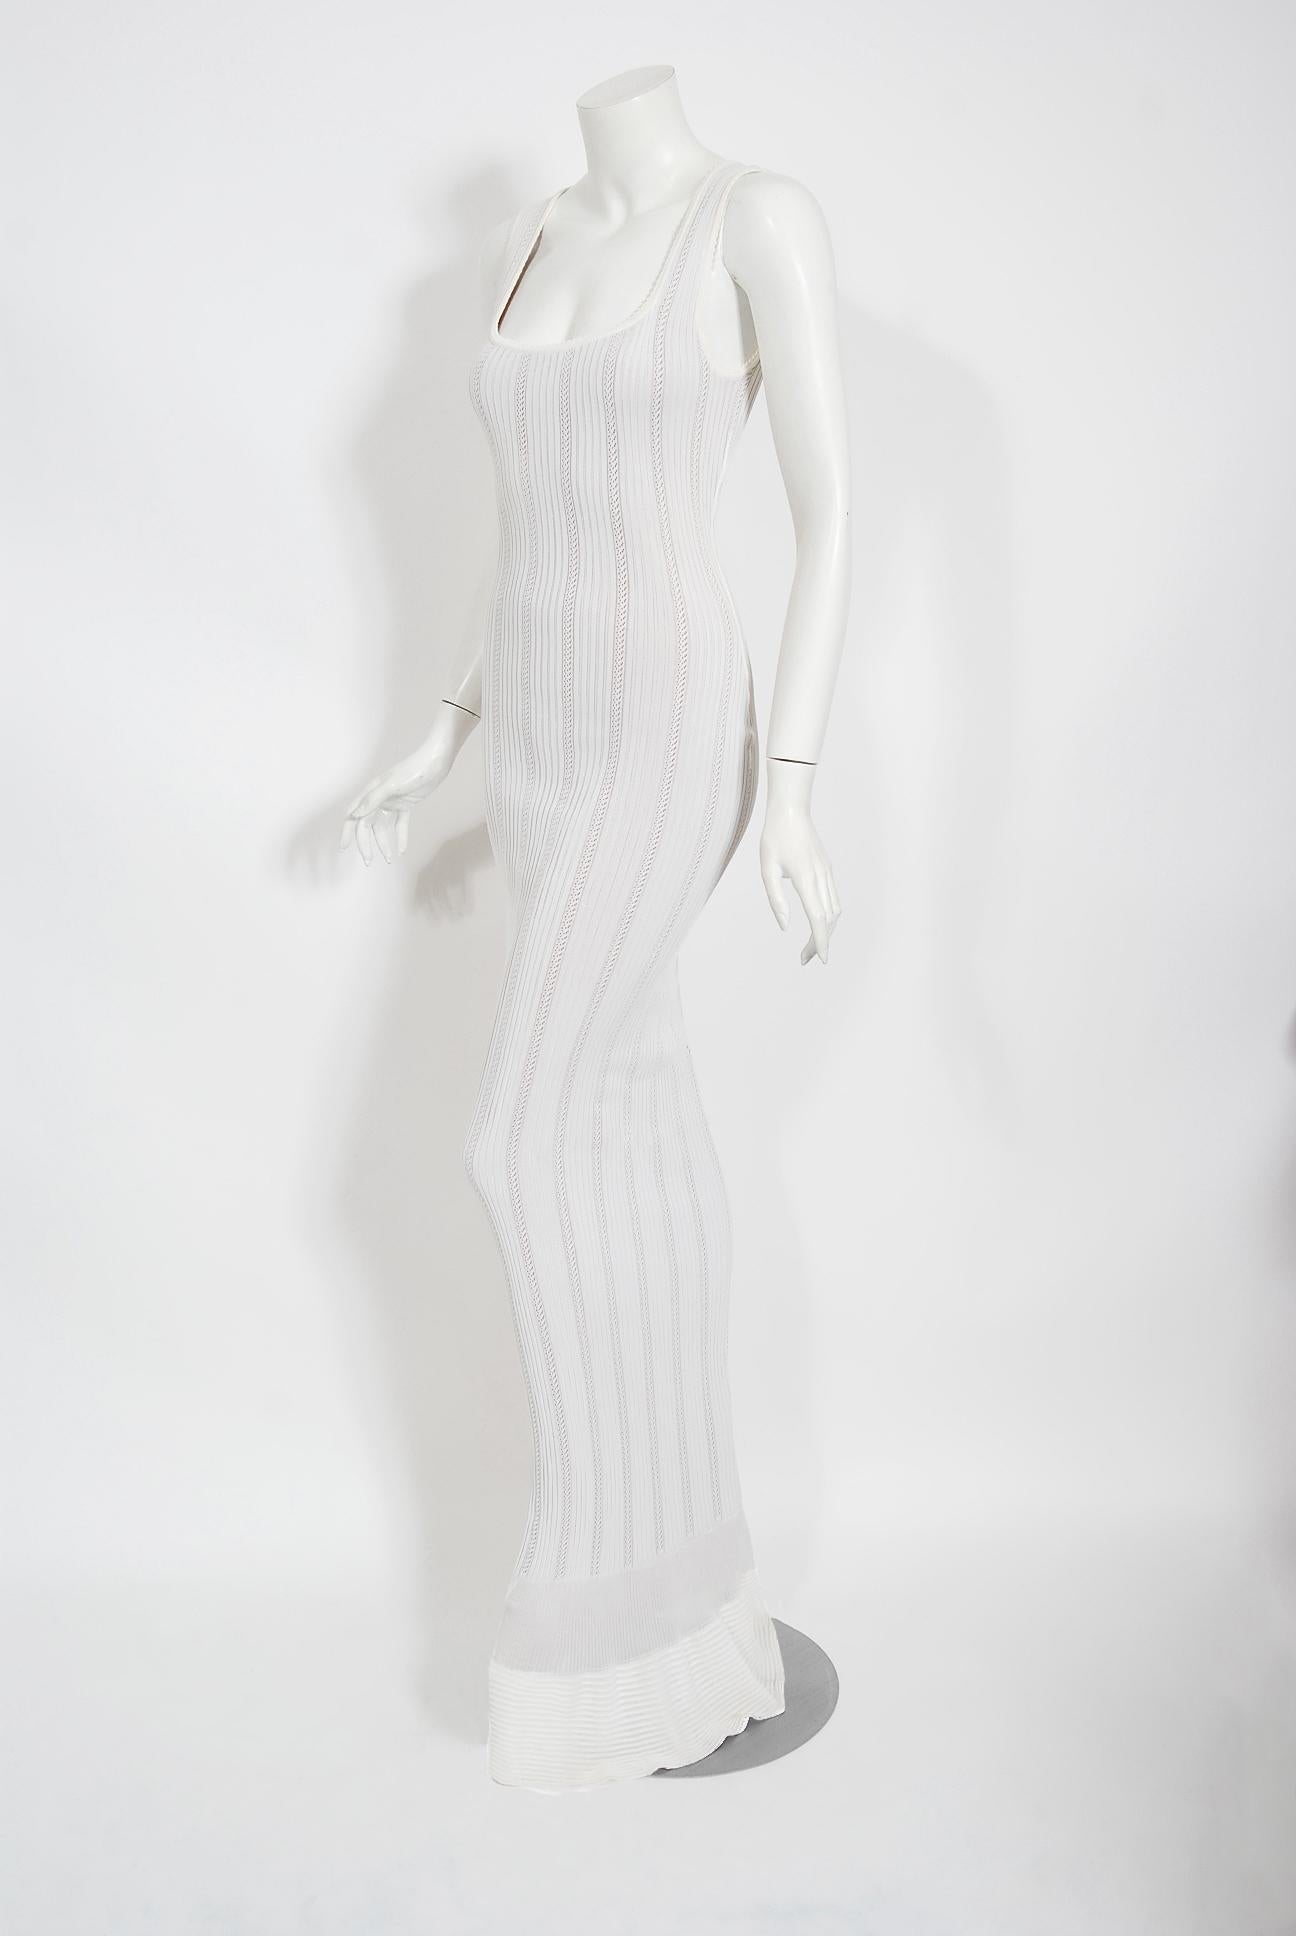 Vintage 1996 Azzedine Alaia White Nude-Illusion Knit Hourglass Floor Length Gown 1